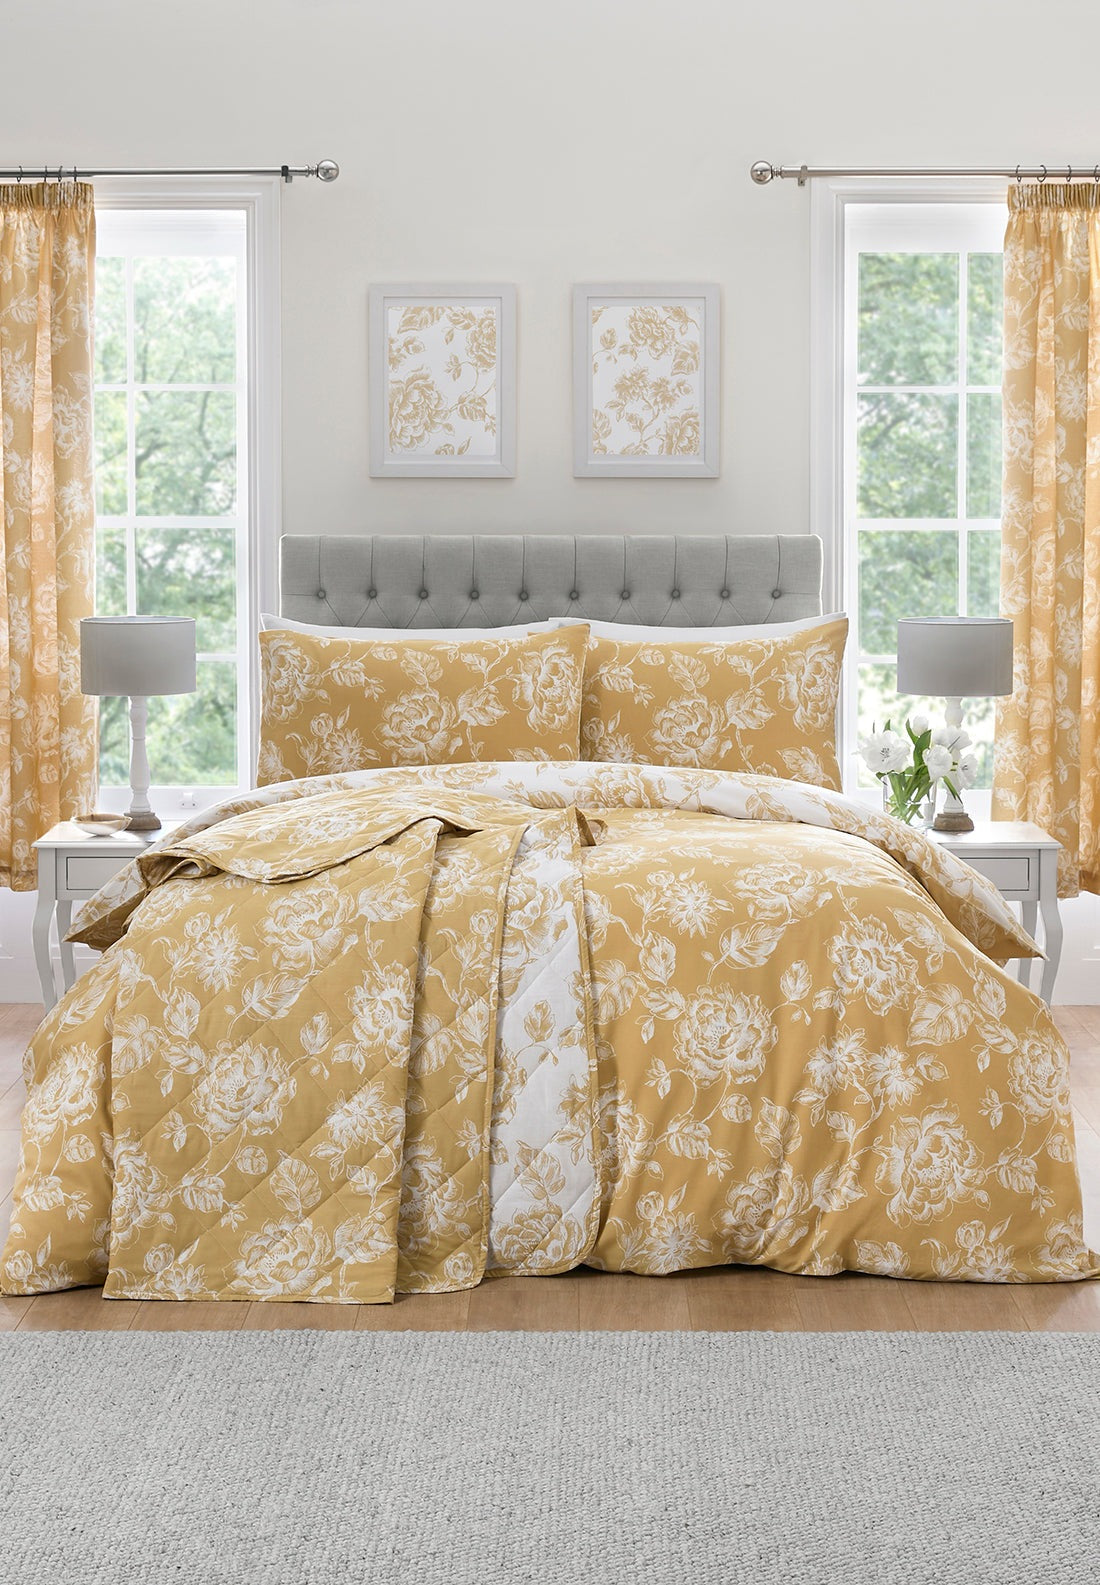 The Home Collection Mimi Bedspread 200cm X 230cm - Gold 1 Shaws Department Stores